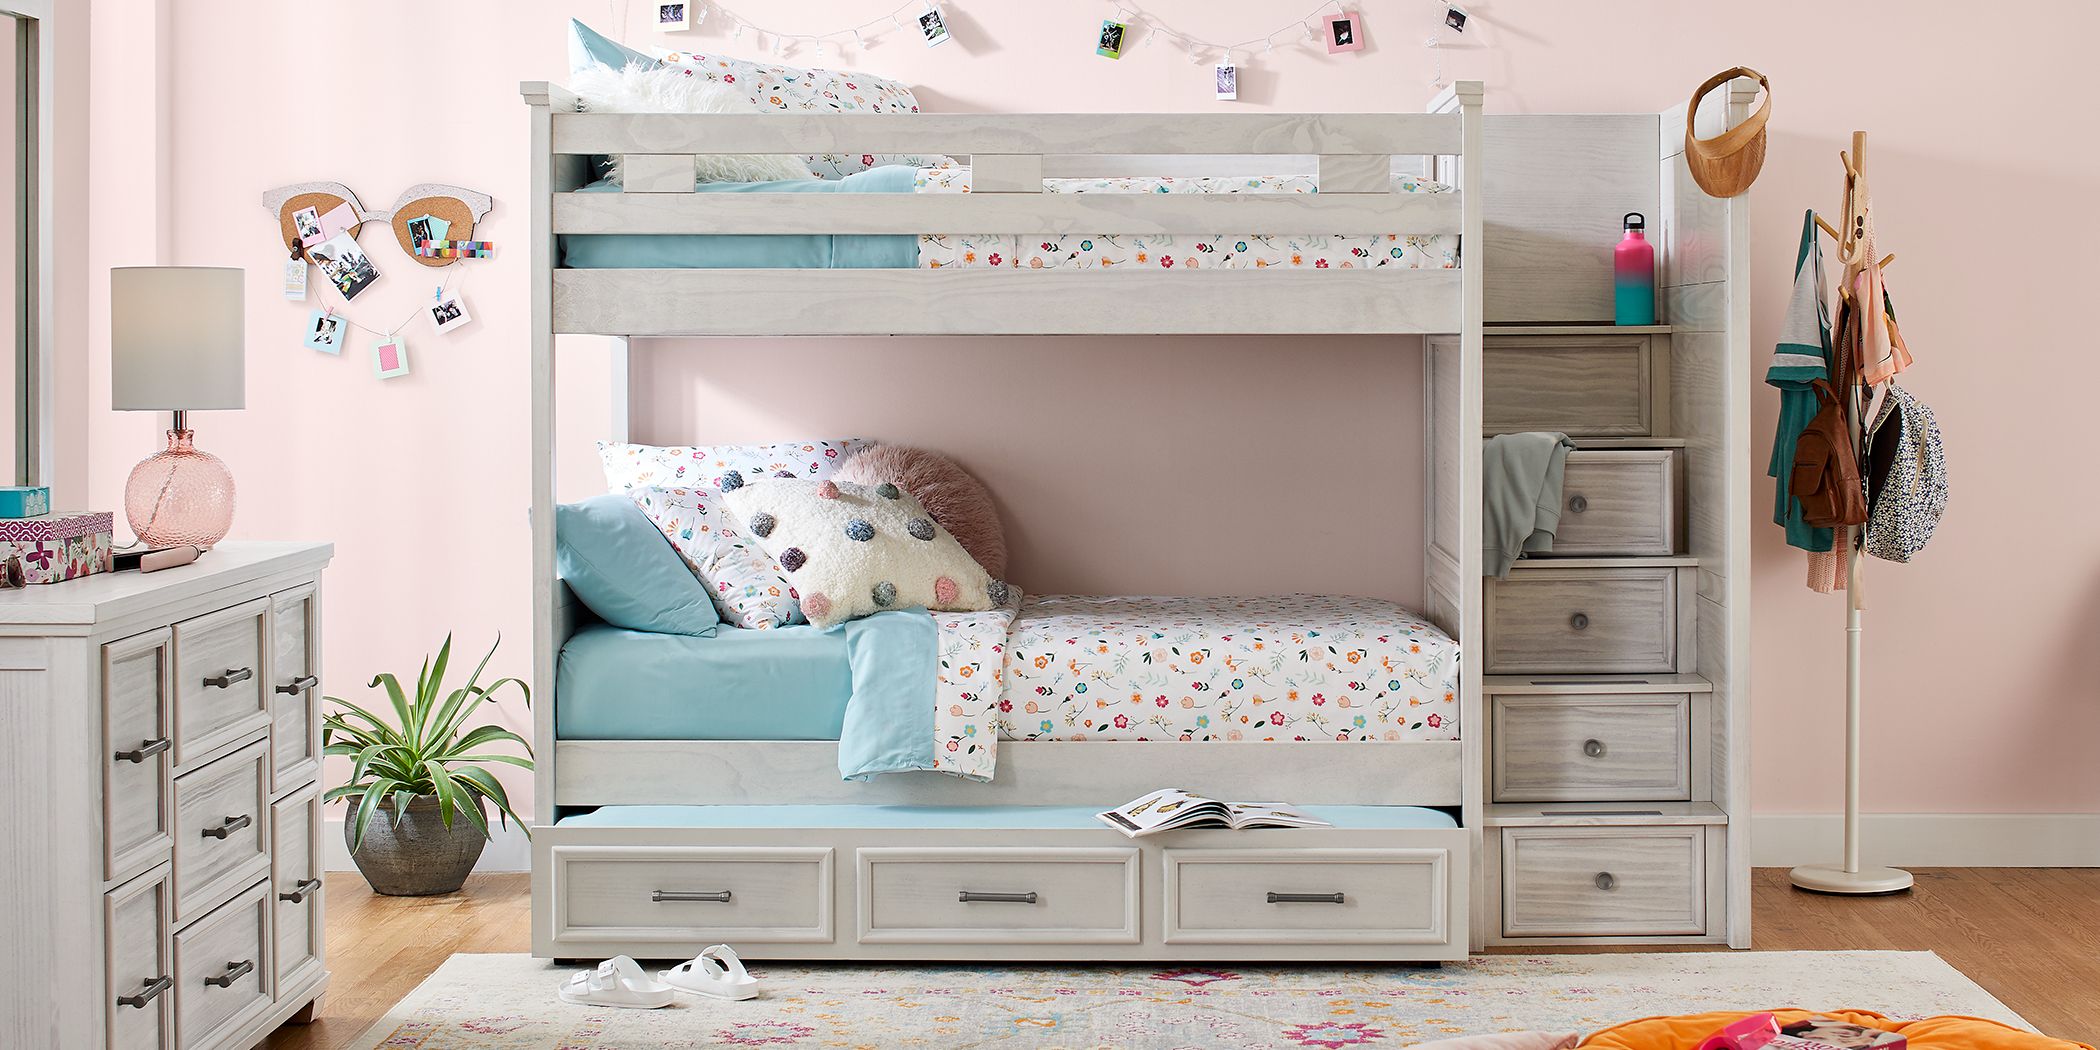 Bunk Beds With Storage Space, Canyon Furniture Company Twin Step Bunk Bed